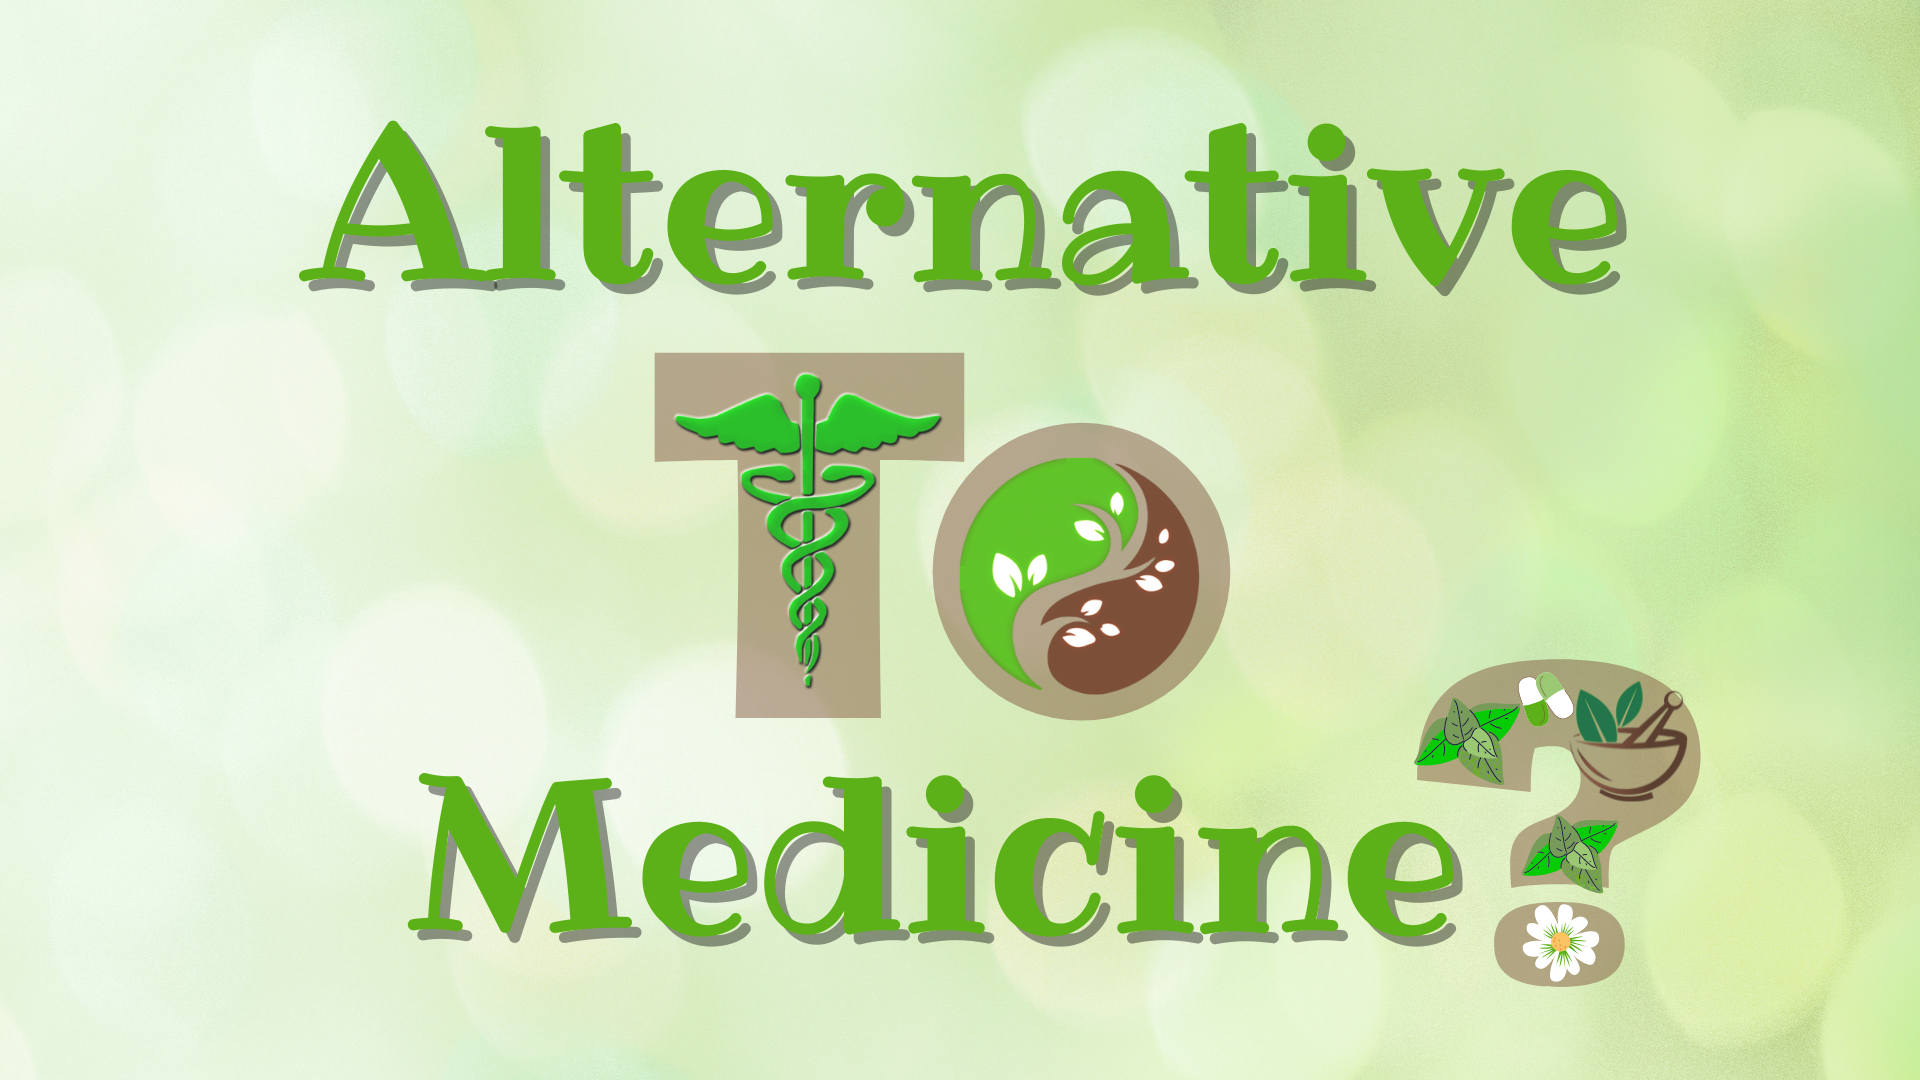 Alternative medicine, complementary and alternative medicine, integrated medicine, functional medicine